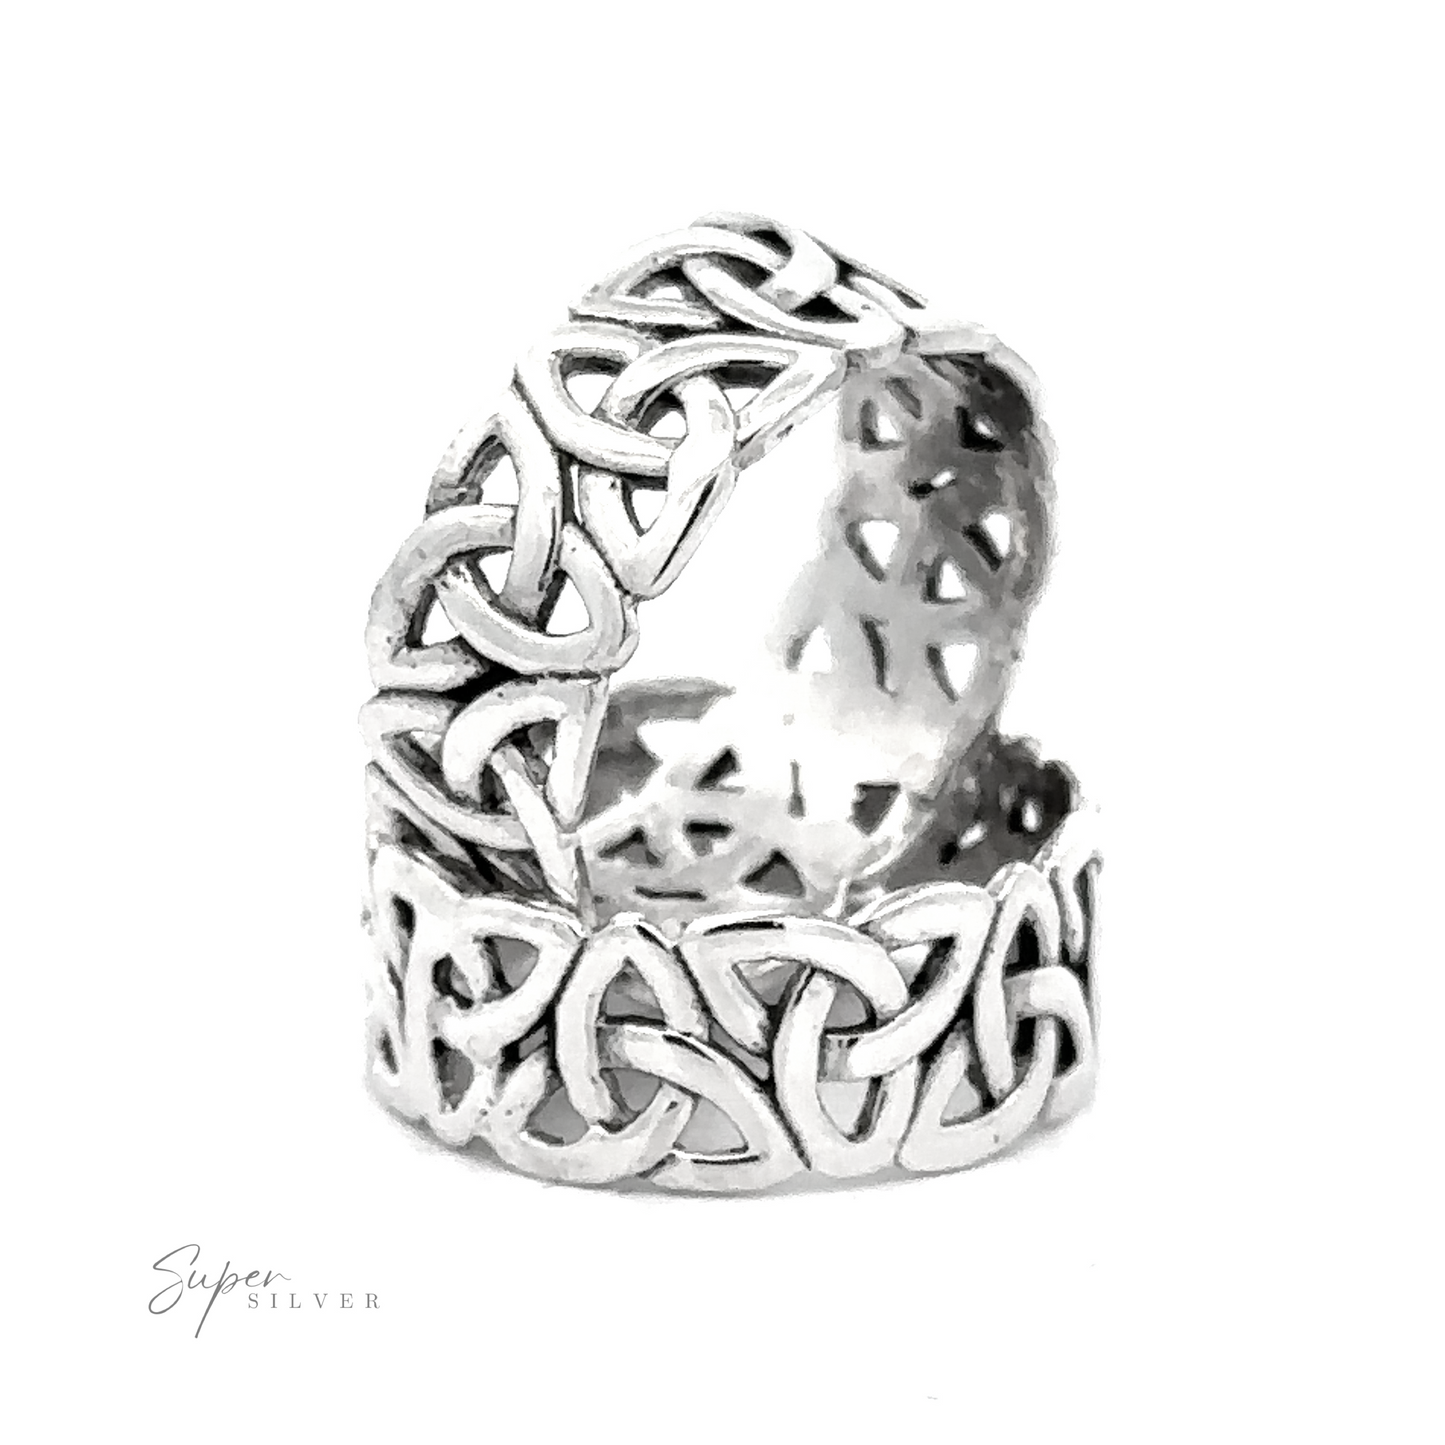 Wide Celtic Trinity Knot Band ring with intricate openwork design, displayed against a plain white background. The ring's band curves slightly outward.